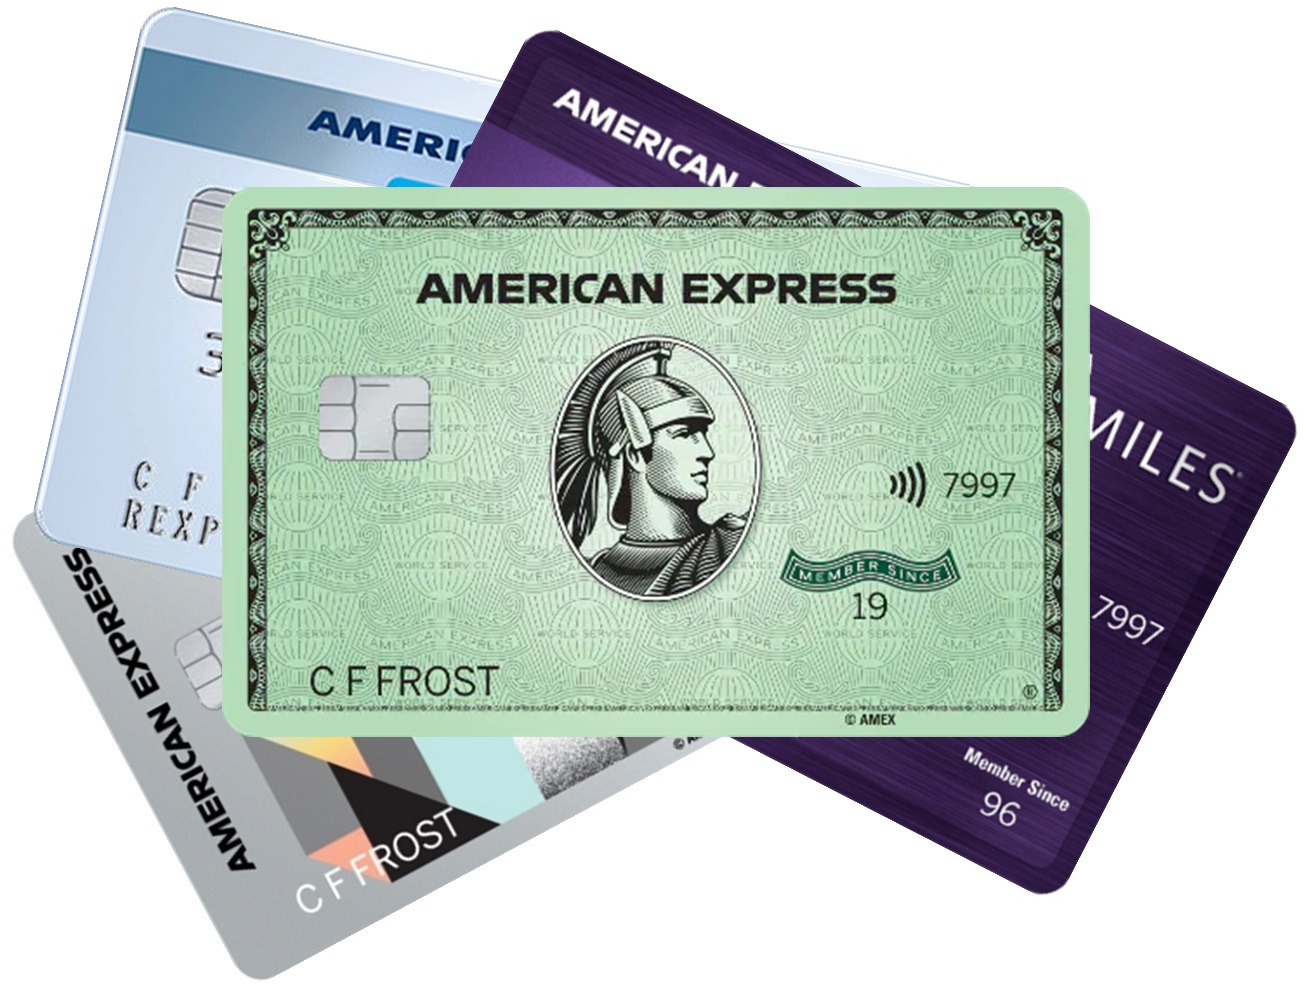 Amex Green Card Counts as Credit Card Towards Amex Limit